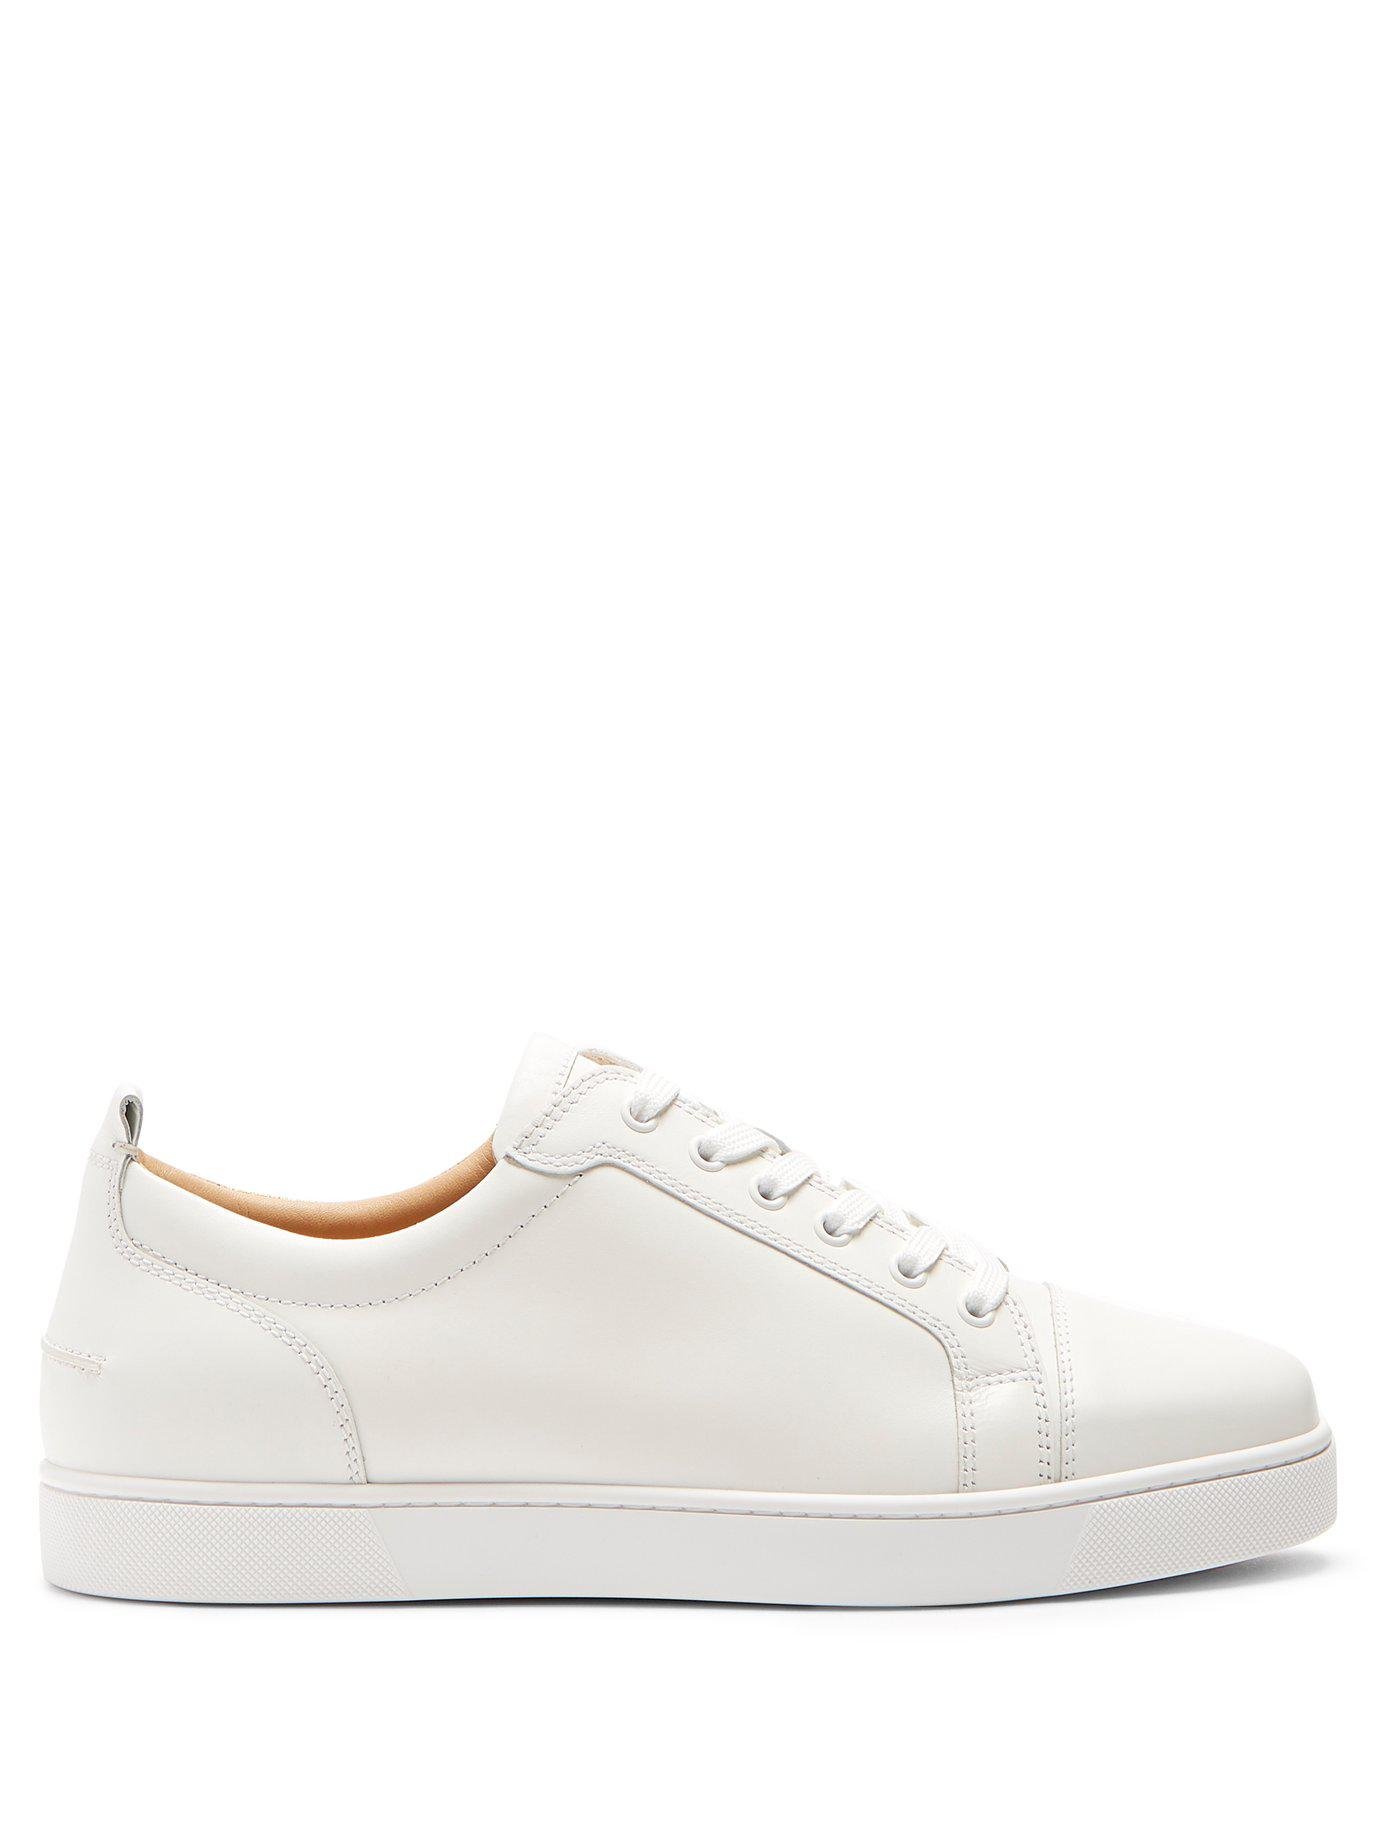 louboutin homme basse blanche